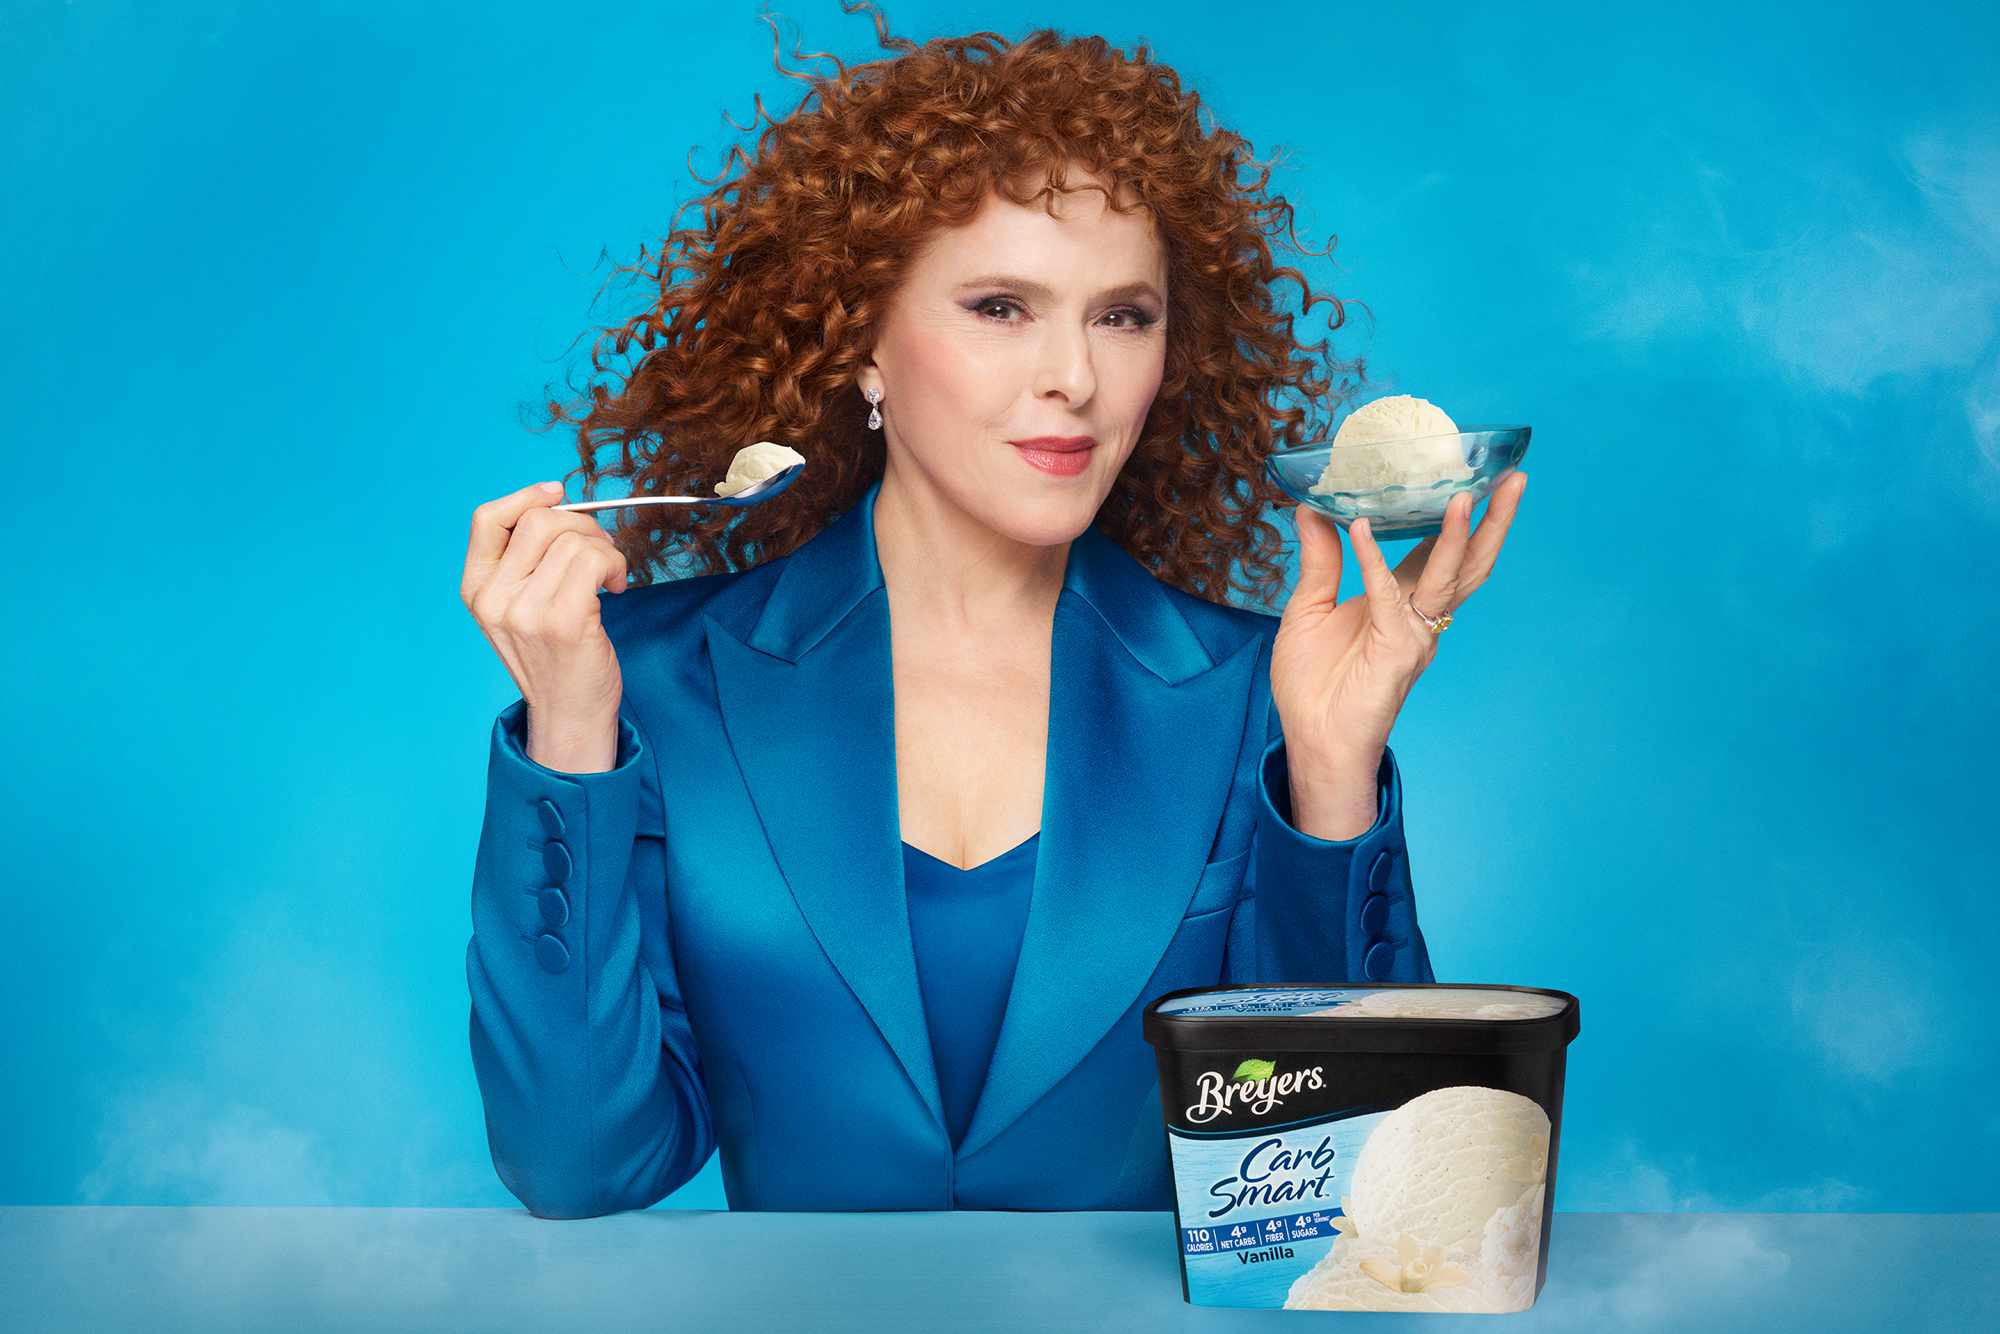 Bernadette Peters Teams with Breyers to Rethink Ice Cream as an Anti-Aging Product (Exclusive)